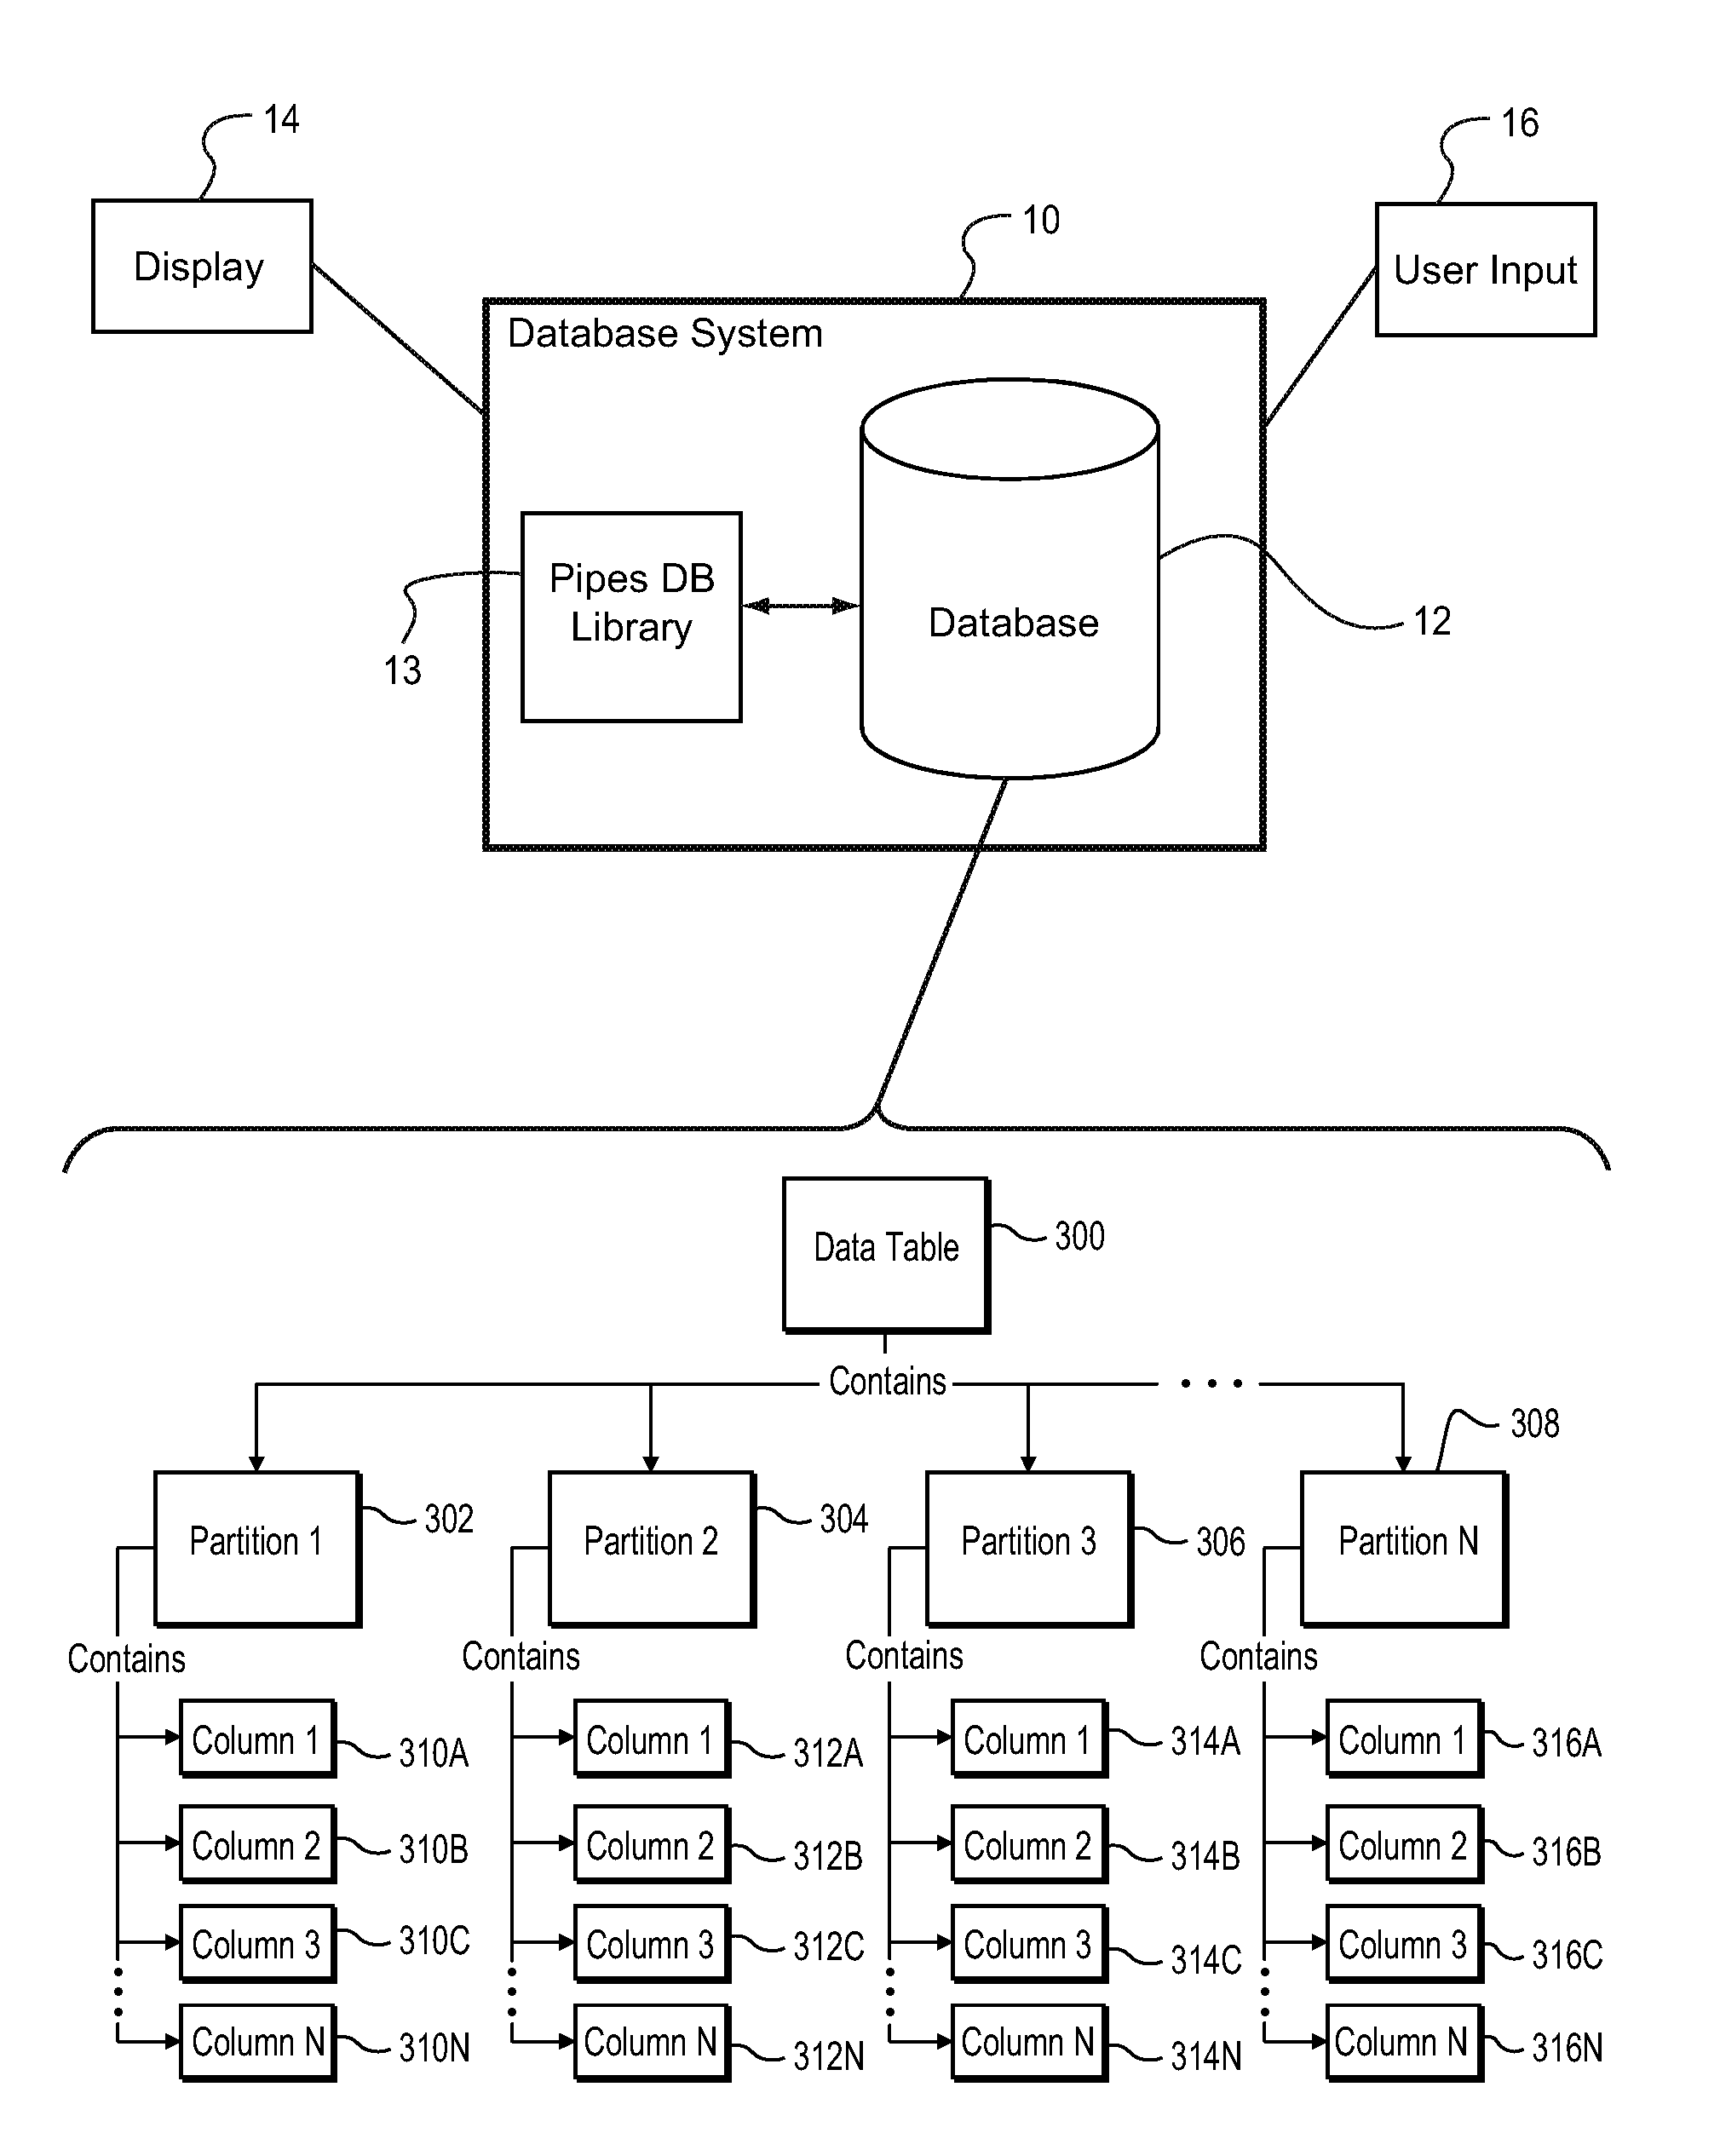 Partitioned database model to increase the scalability of an information system